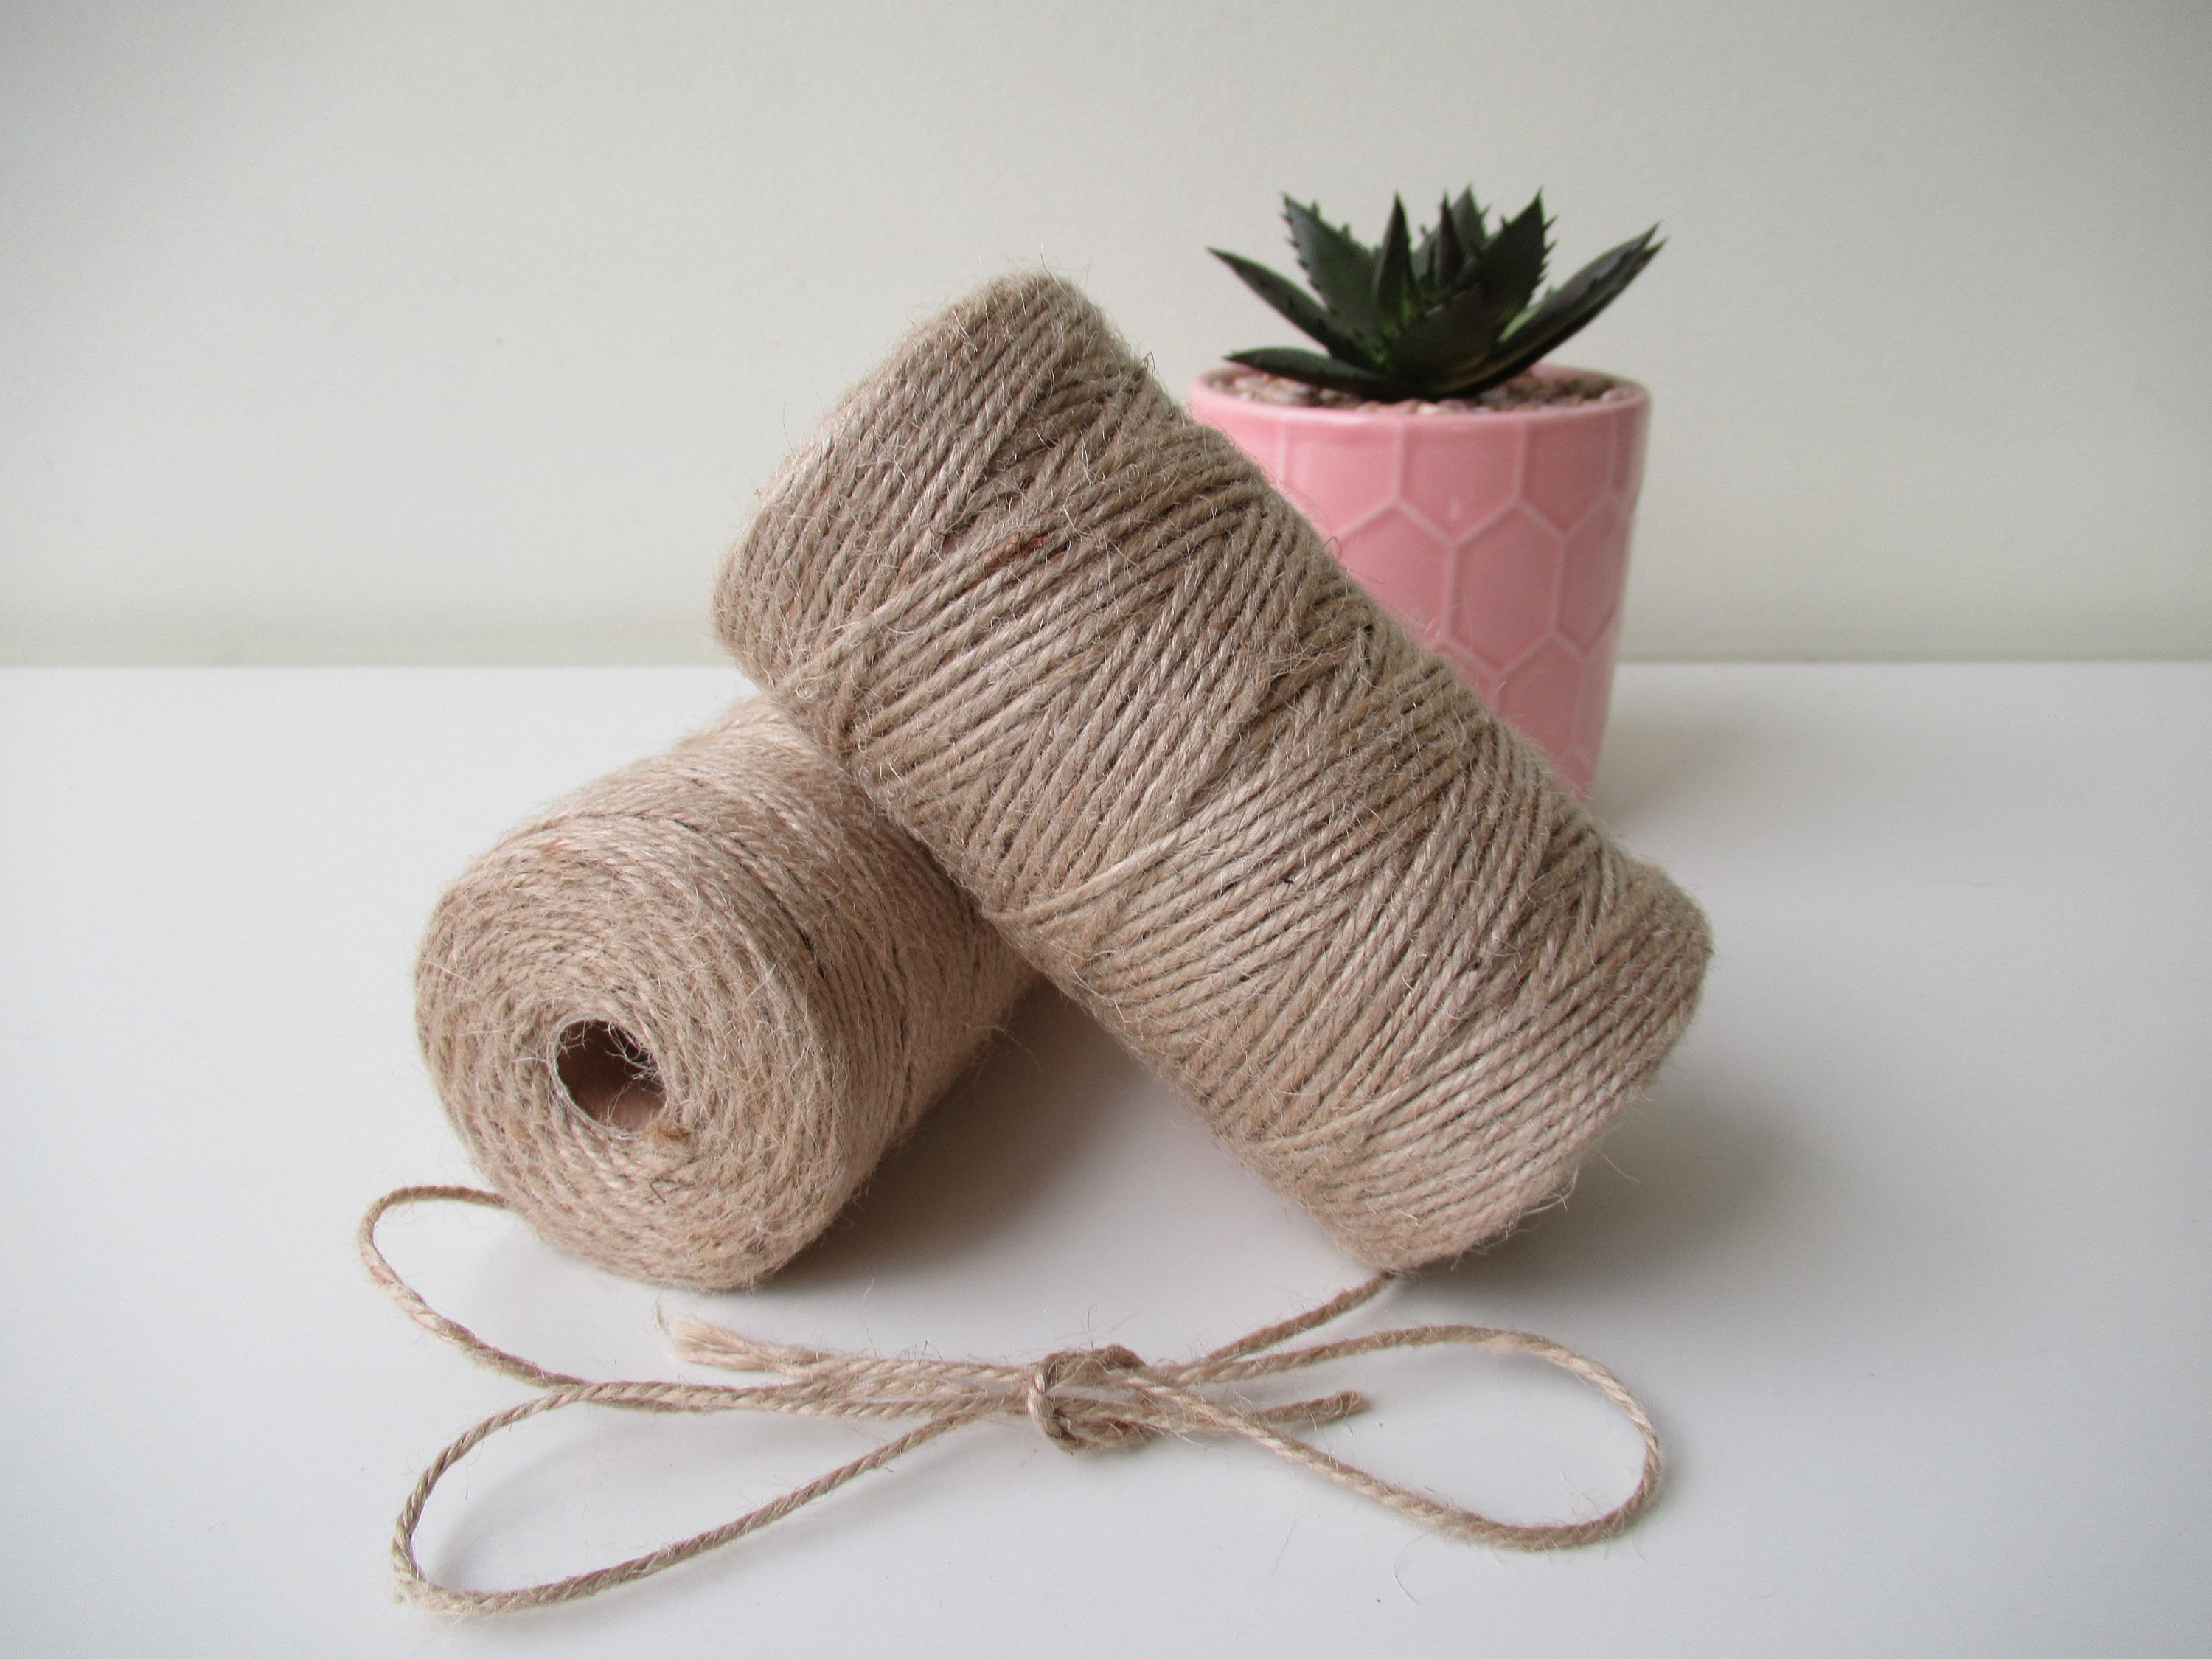 Natural Jute Twine 4mm 100 Feet Crafting Twine String for Crafts Gift, Craft Projects, Wrapping, Bundling, Packing, Gardening and More, Jute Rope to